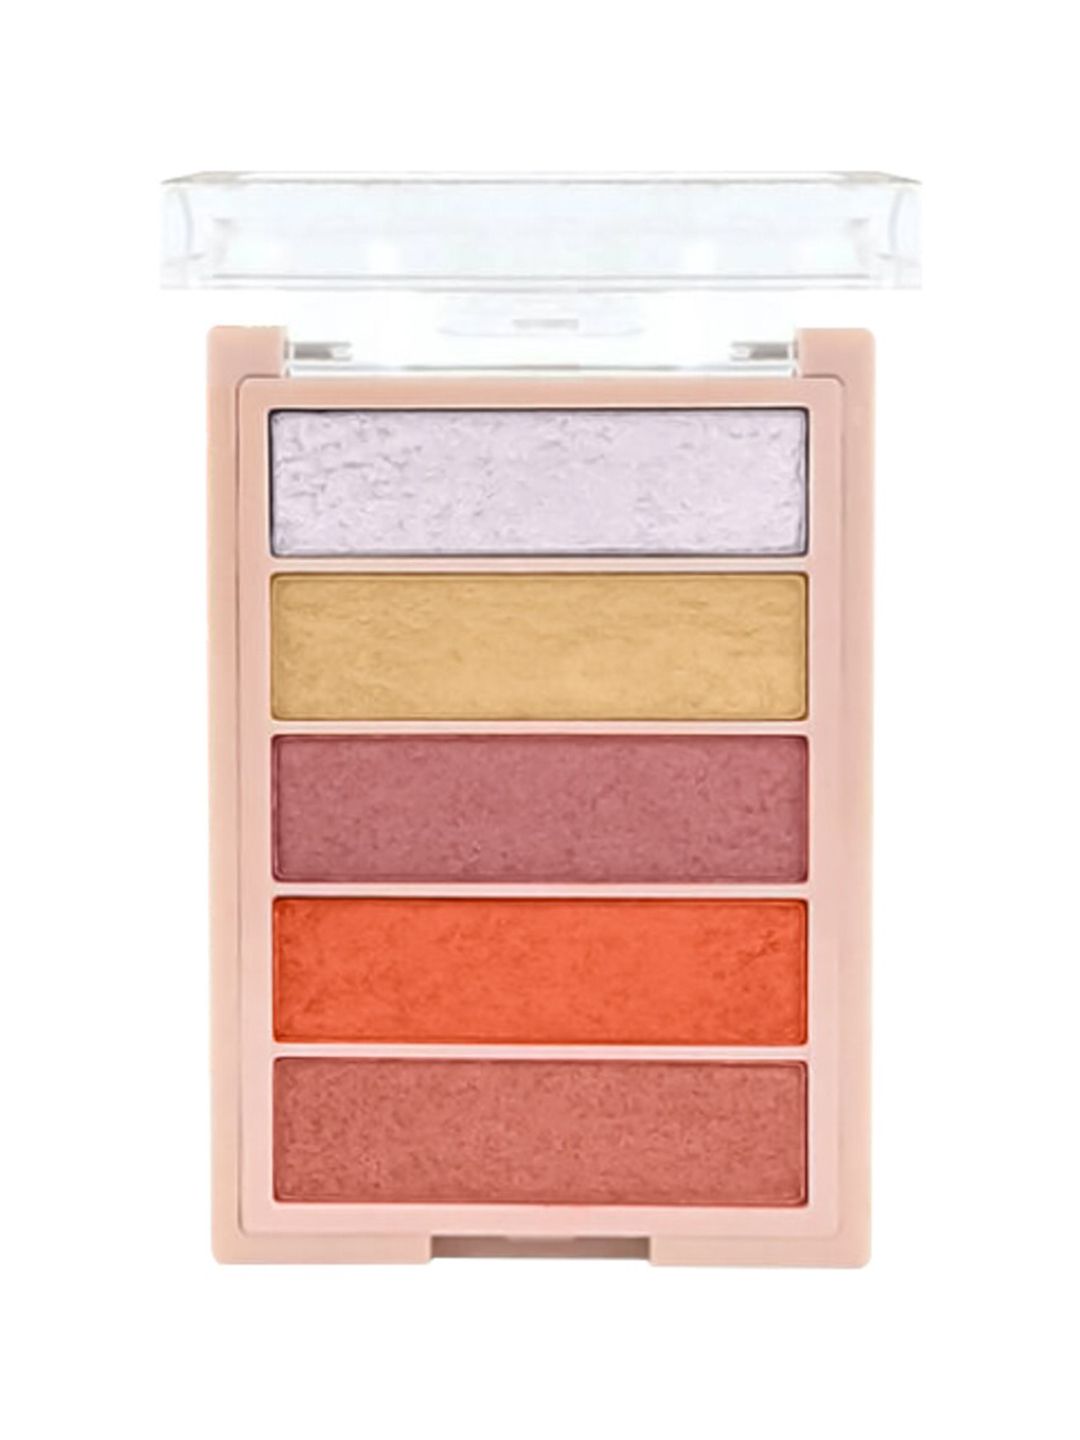 Sivanna Colors Shimmer Rich Mini Eye Shadow Palette - HF5034 01 Price in India